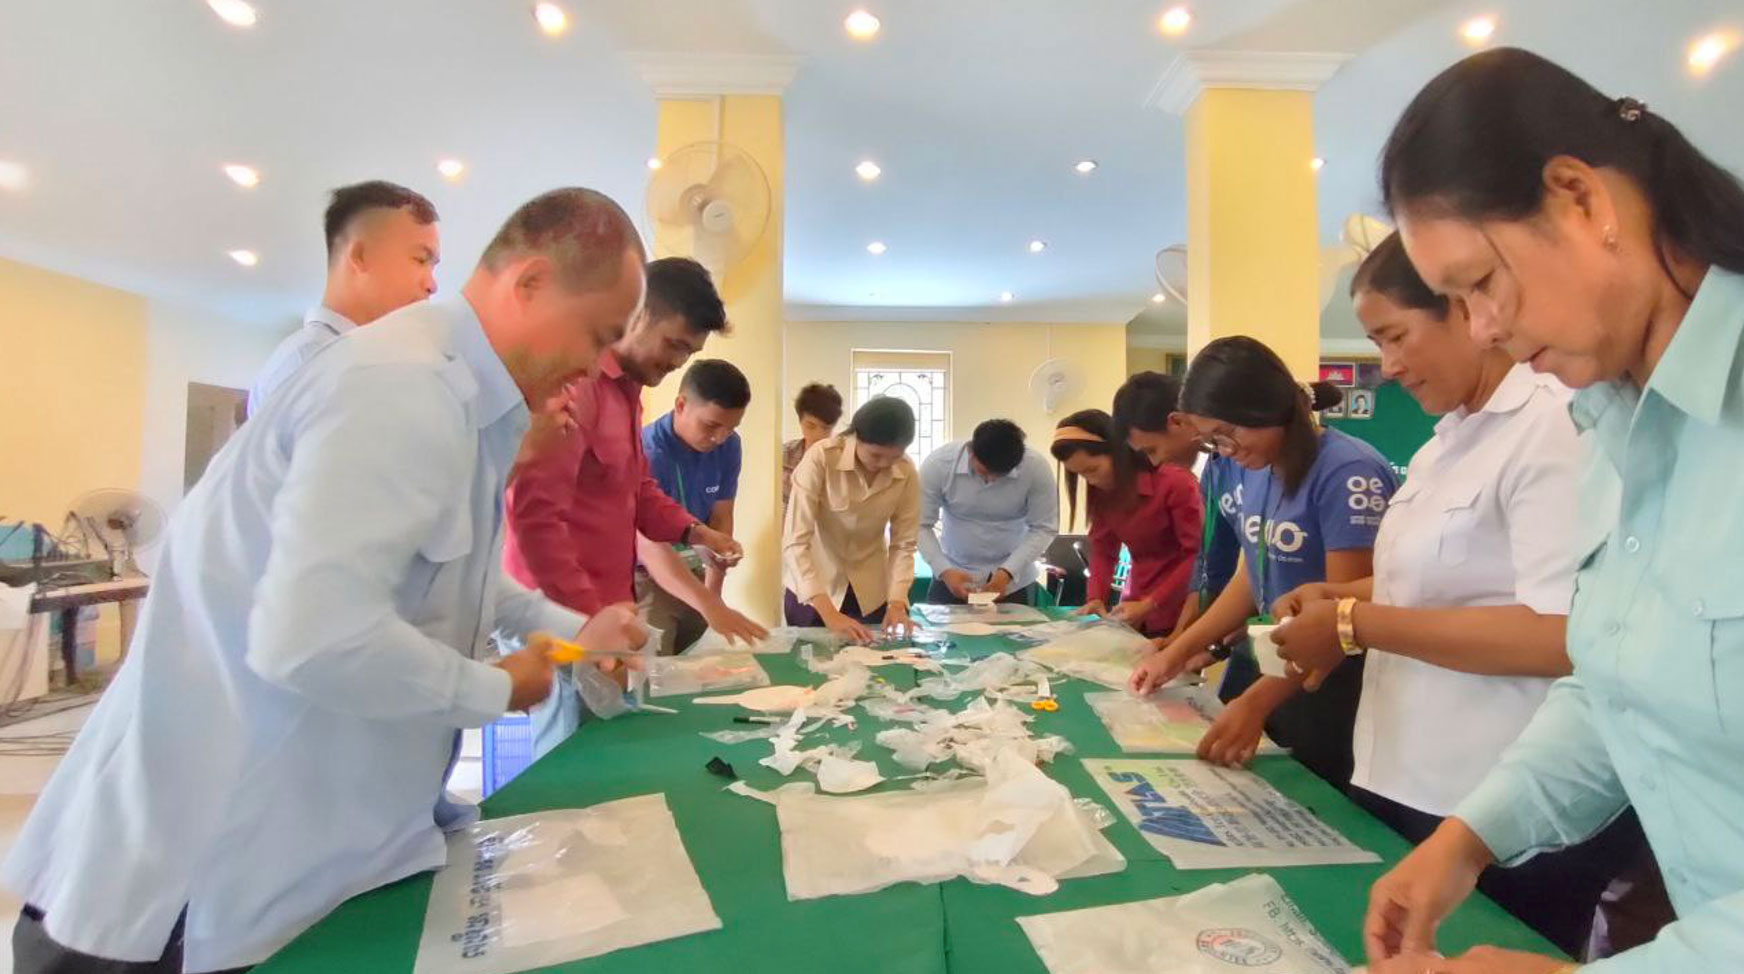 Participants creating products from plastic waste